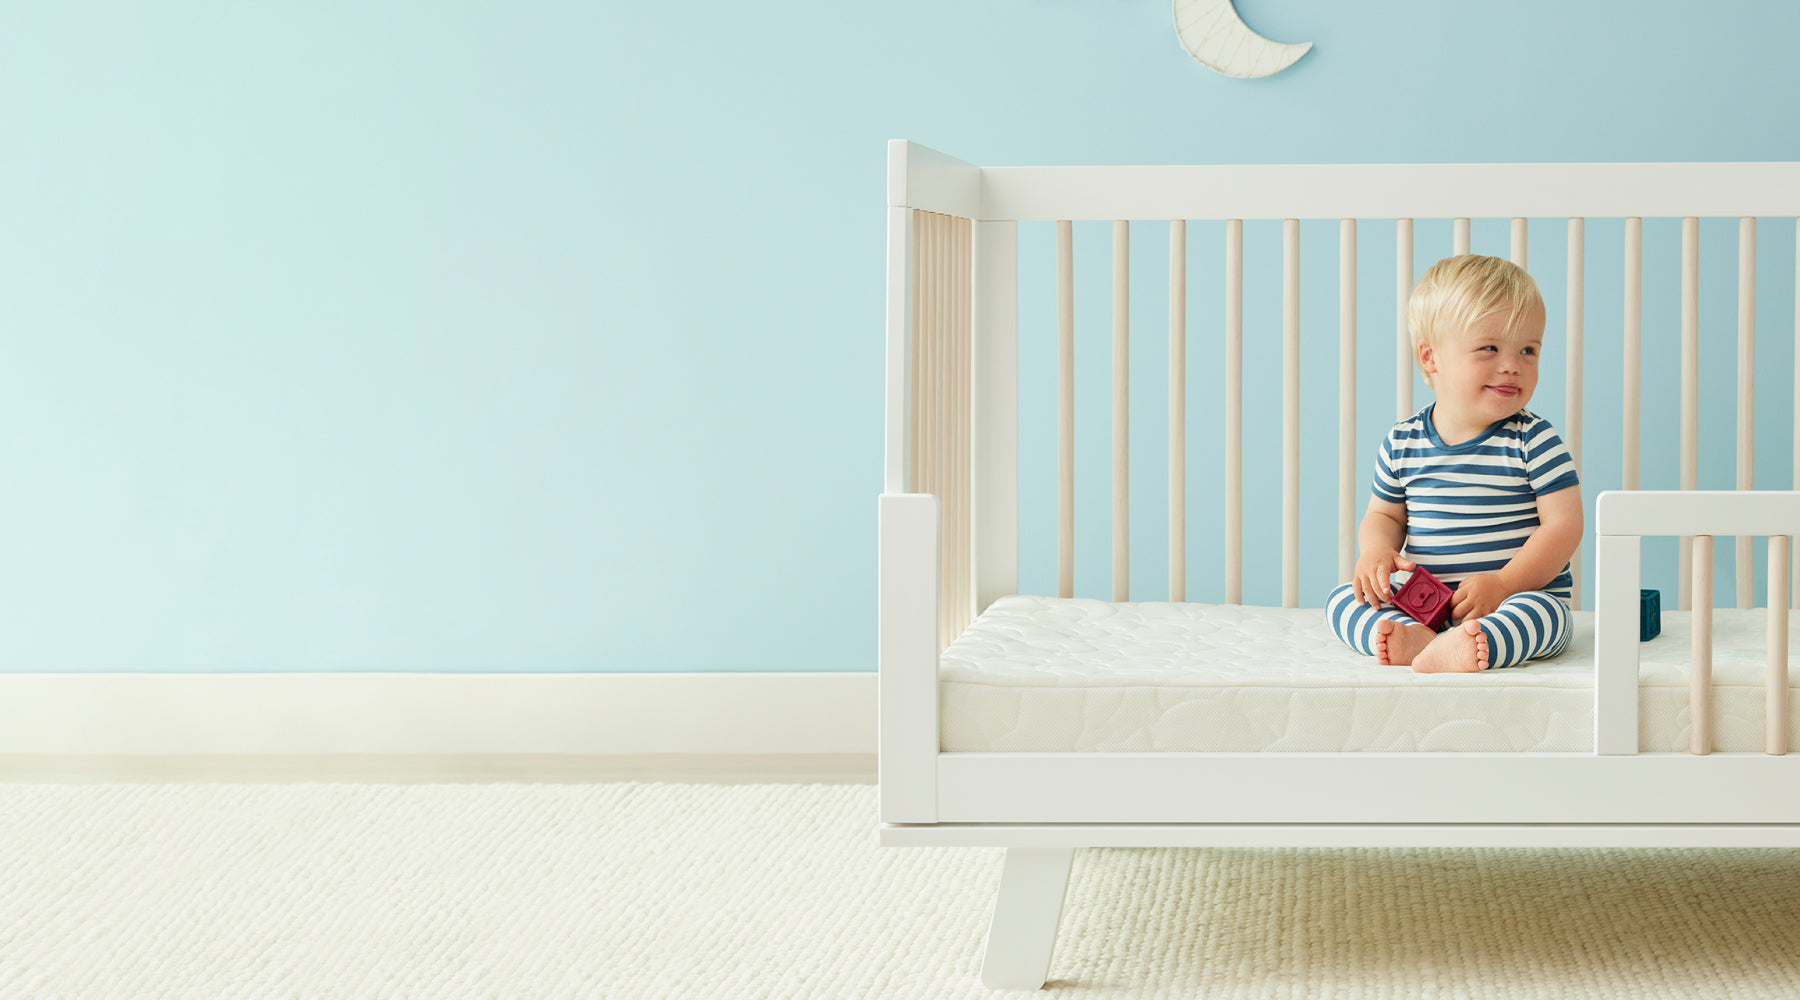 6 Best Places to Buy and Sell Used Baby Gear